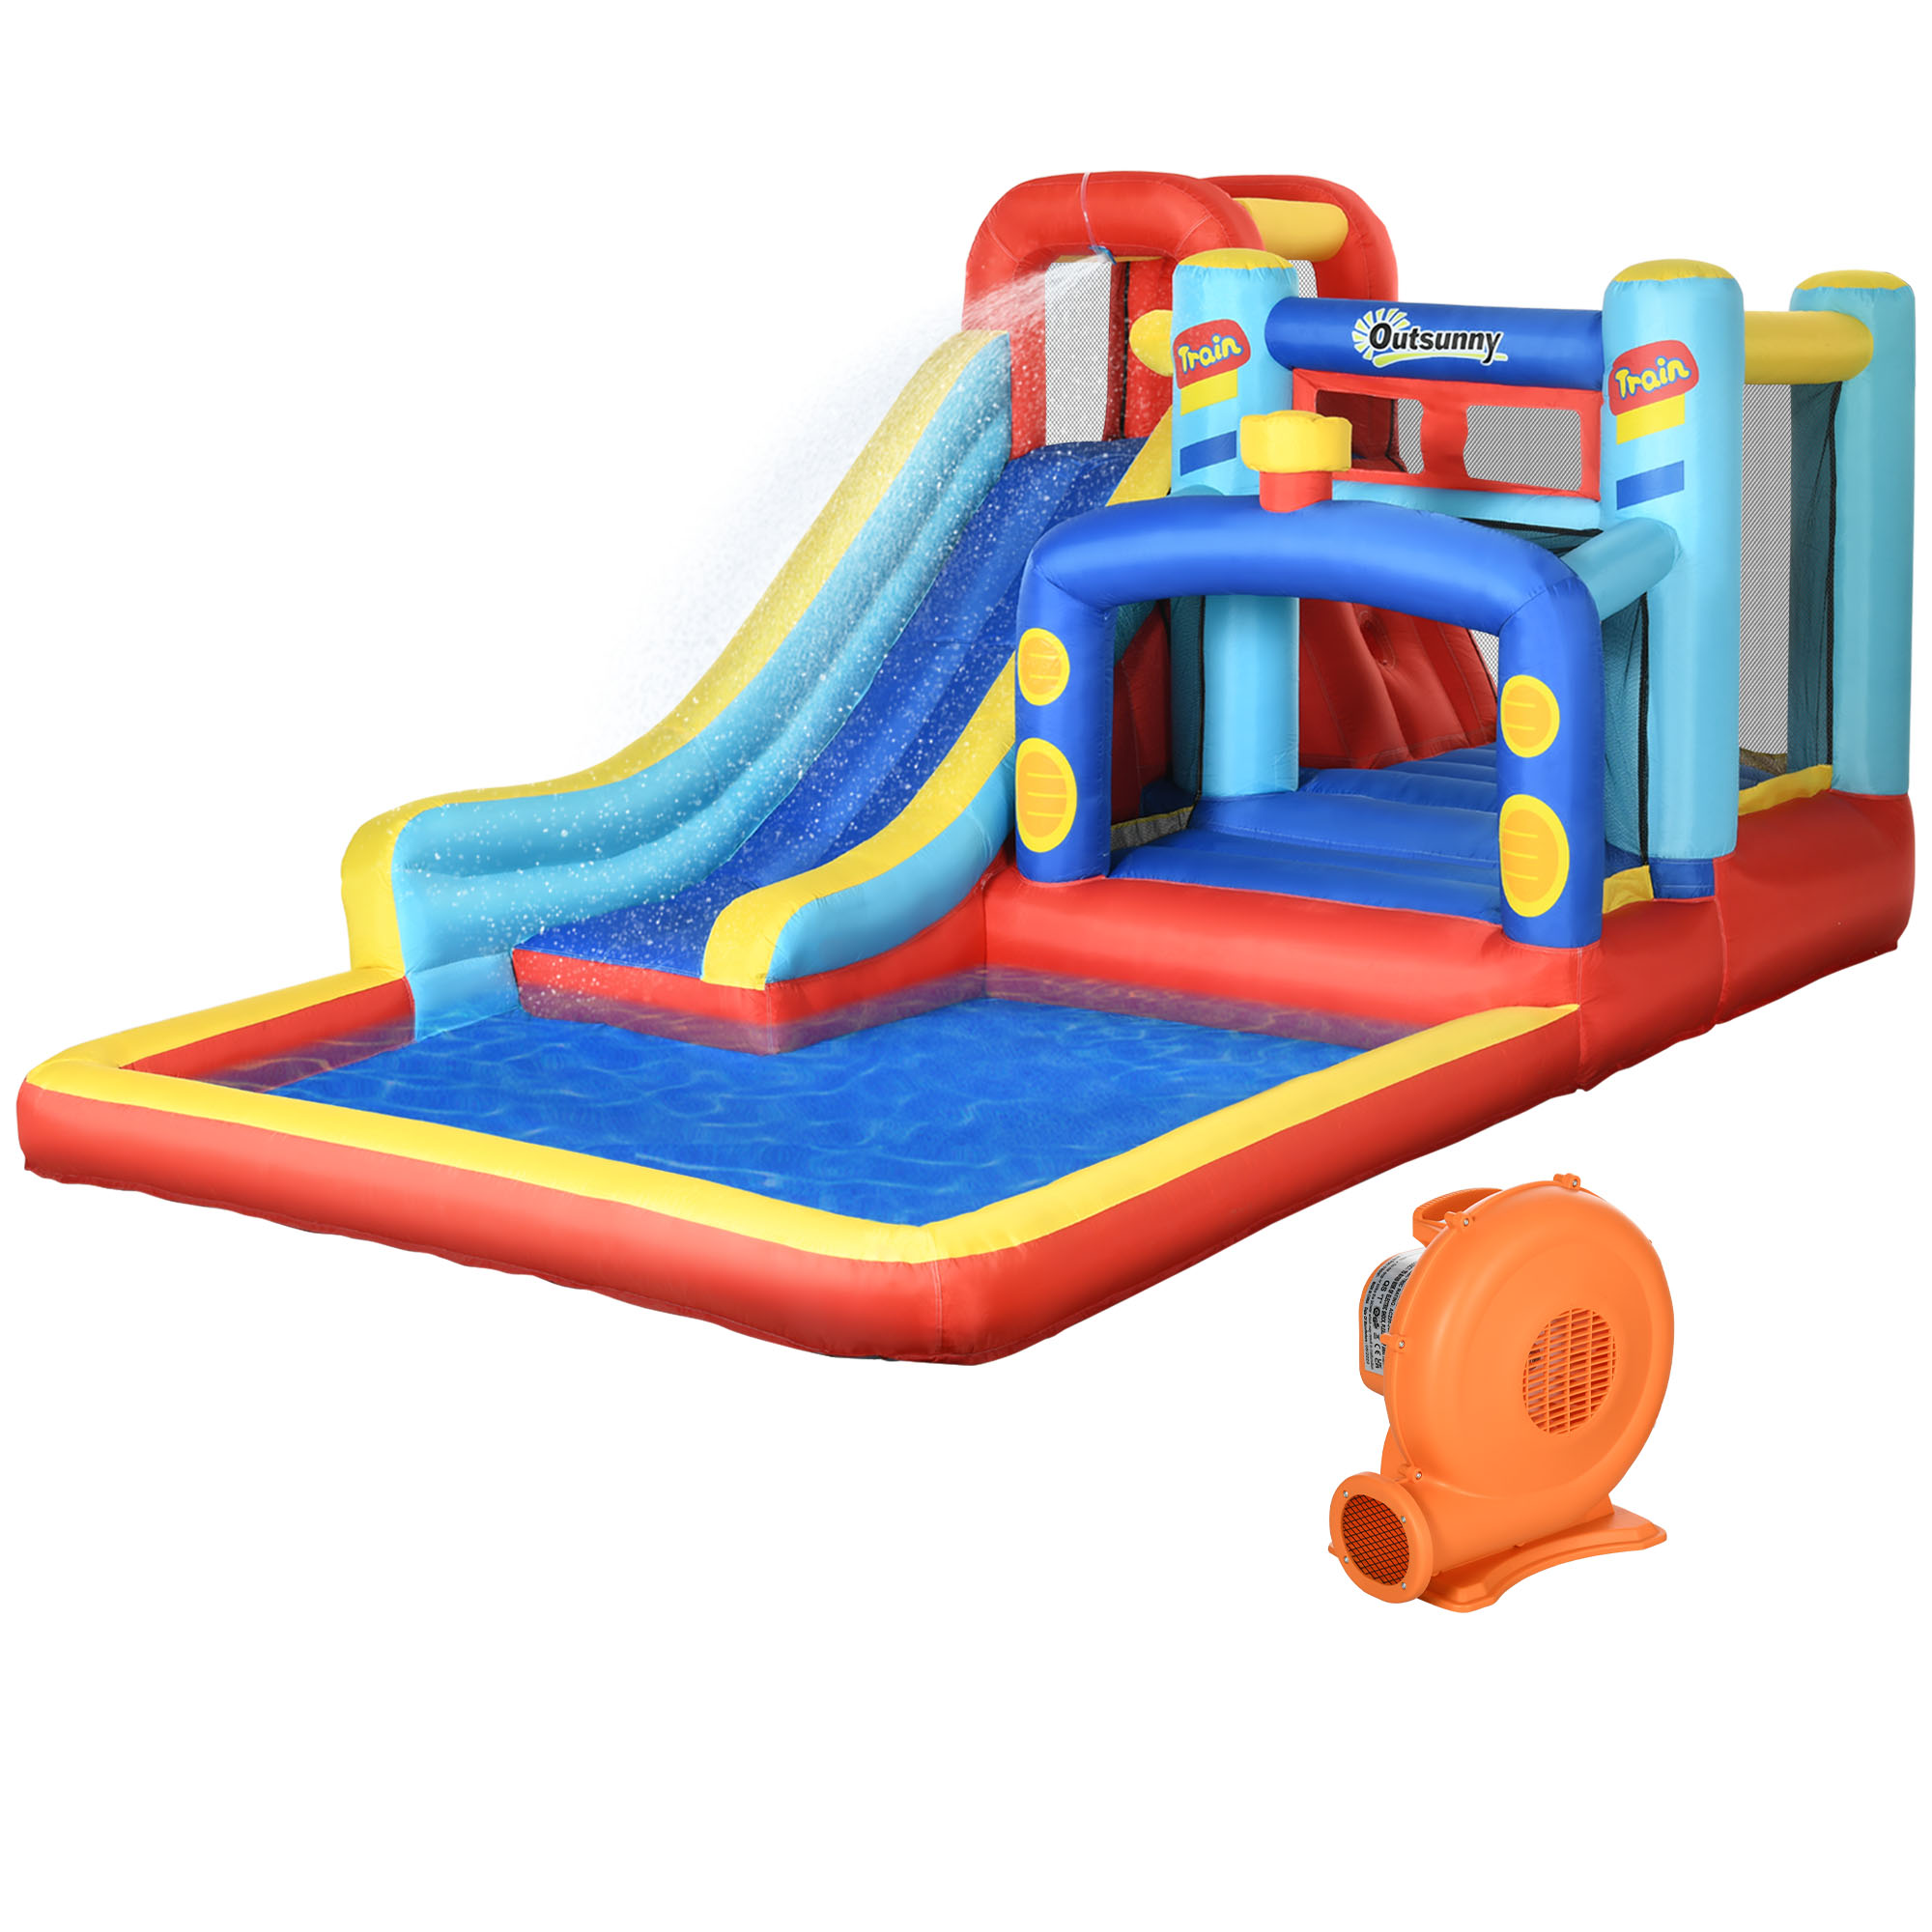 Outsunny Bouncy Castle για παιδιά 3-8 ετών με τραμπολίνο